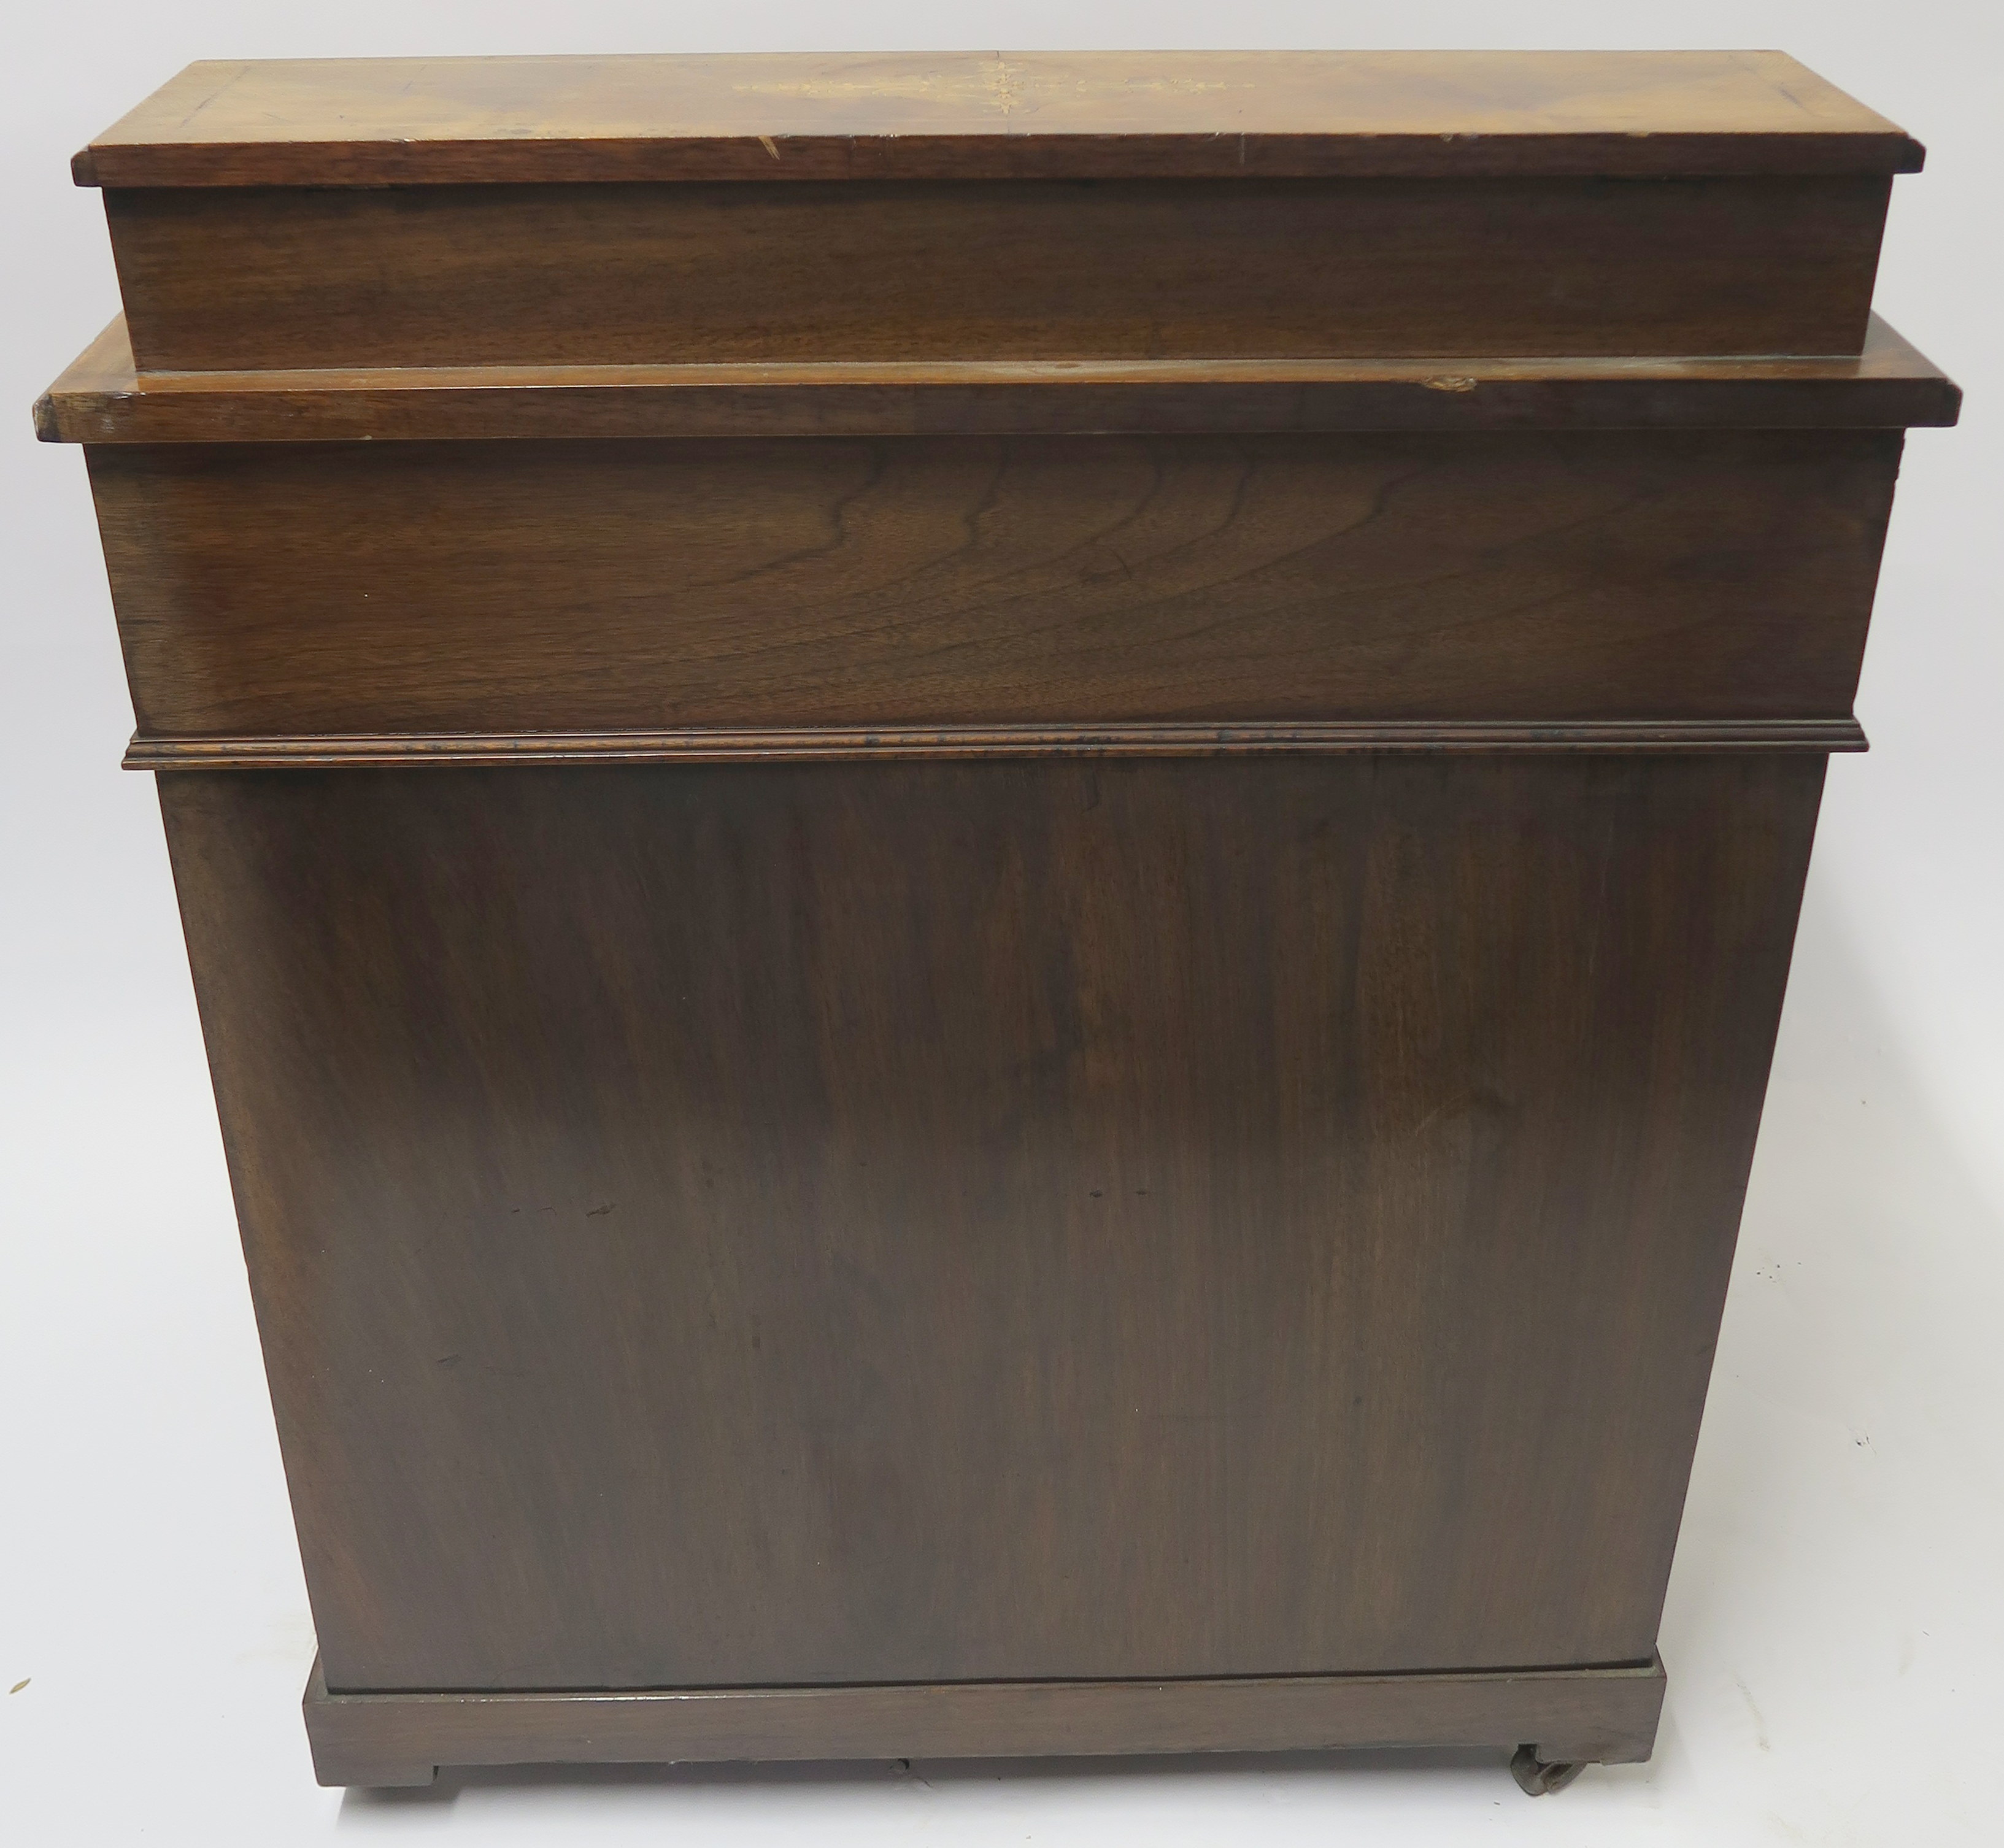 A VICTORIAN INLAID WALNUT DAVENPORT of standard design with four drawers 95cm high, 75cm wide and - Image 7 of 9